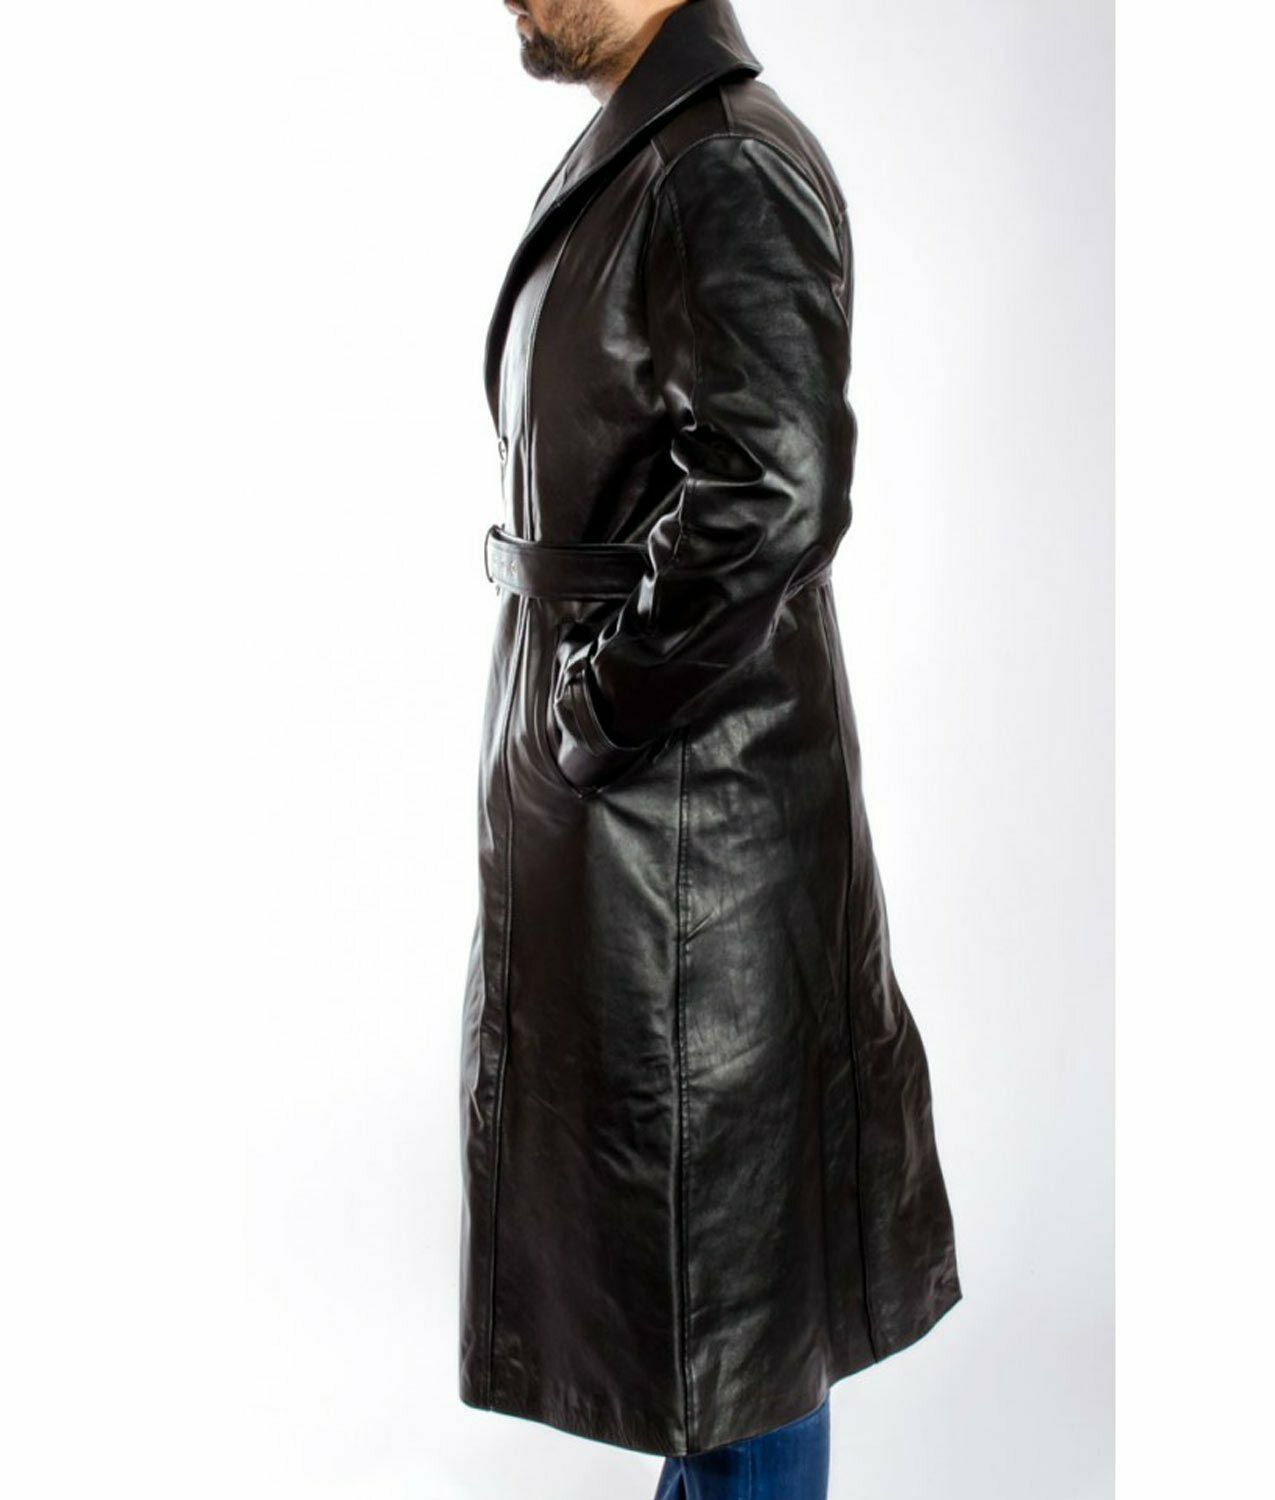 Spine Spark Men's Mickey Rourke Sin City Leather Trench Long Coat